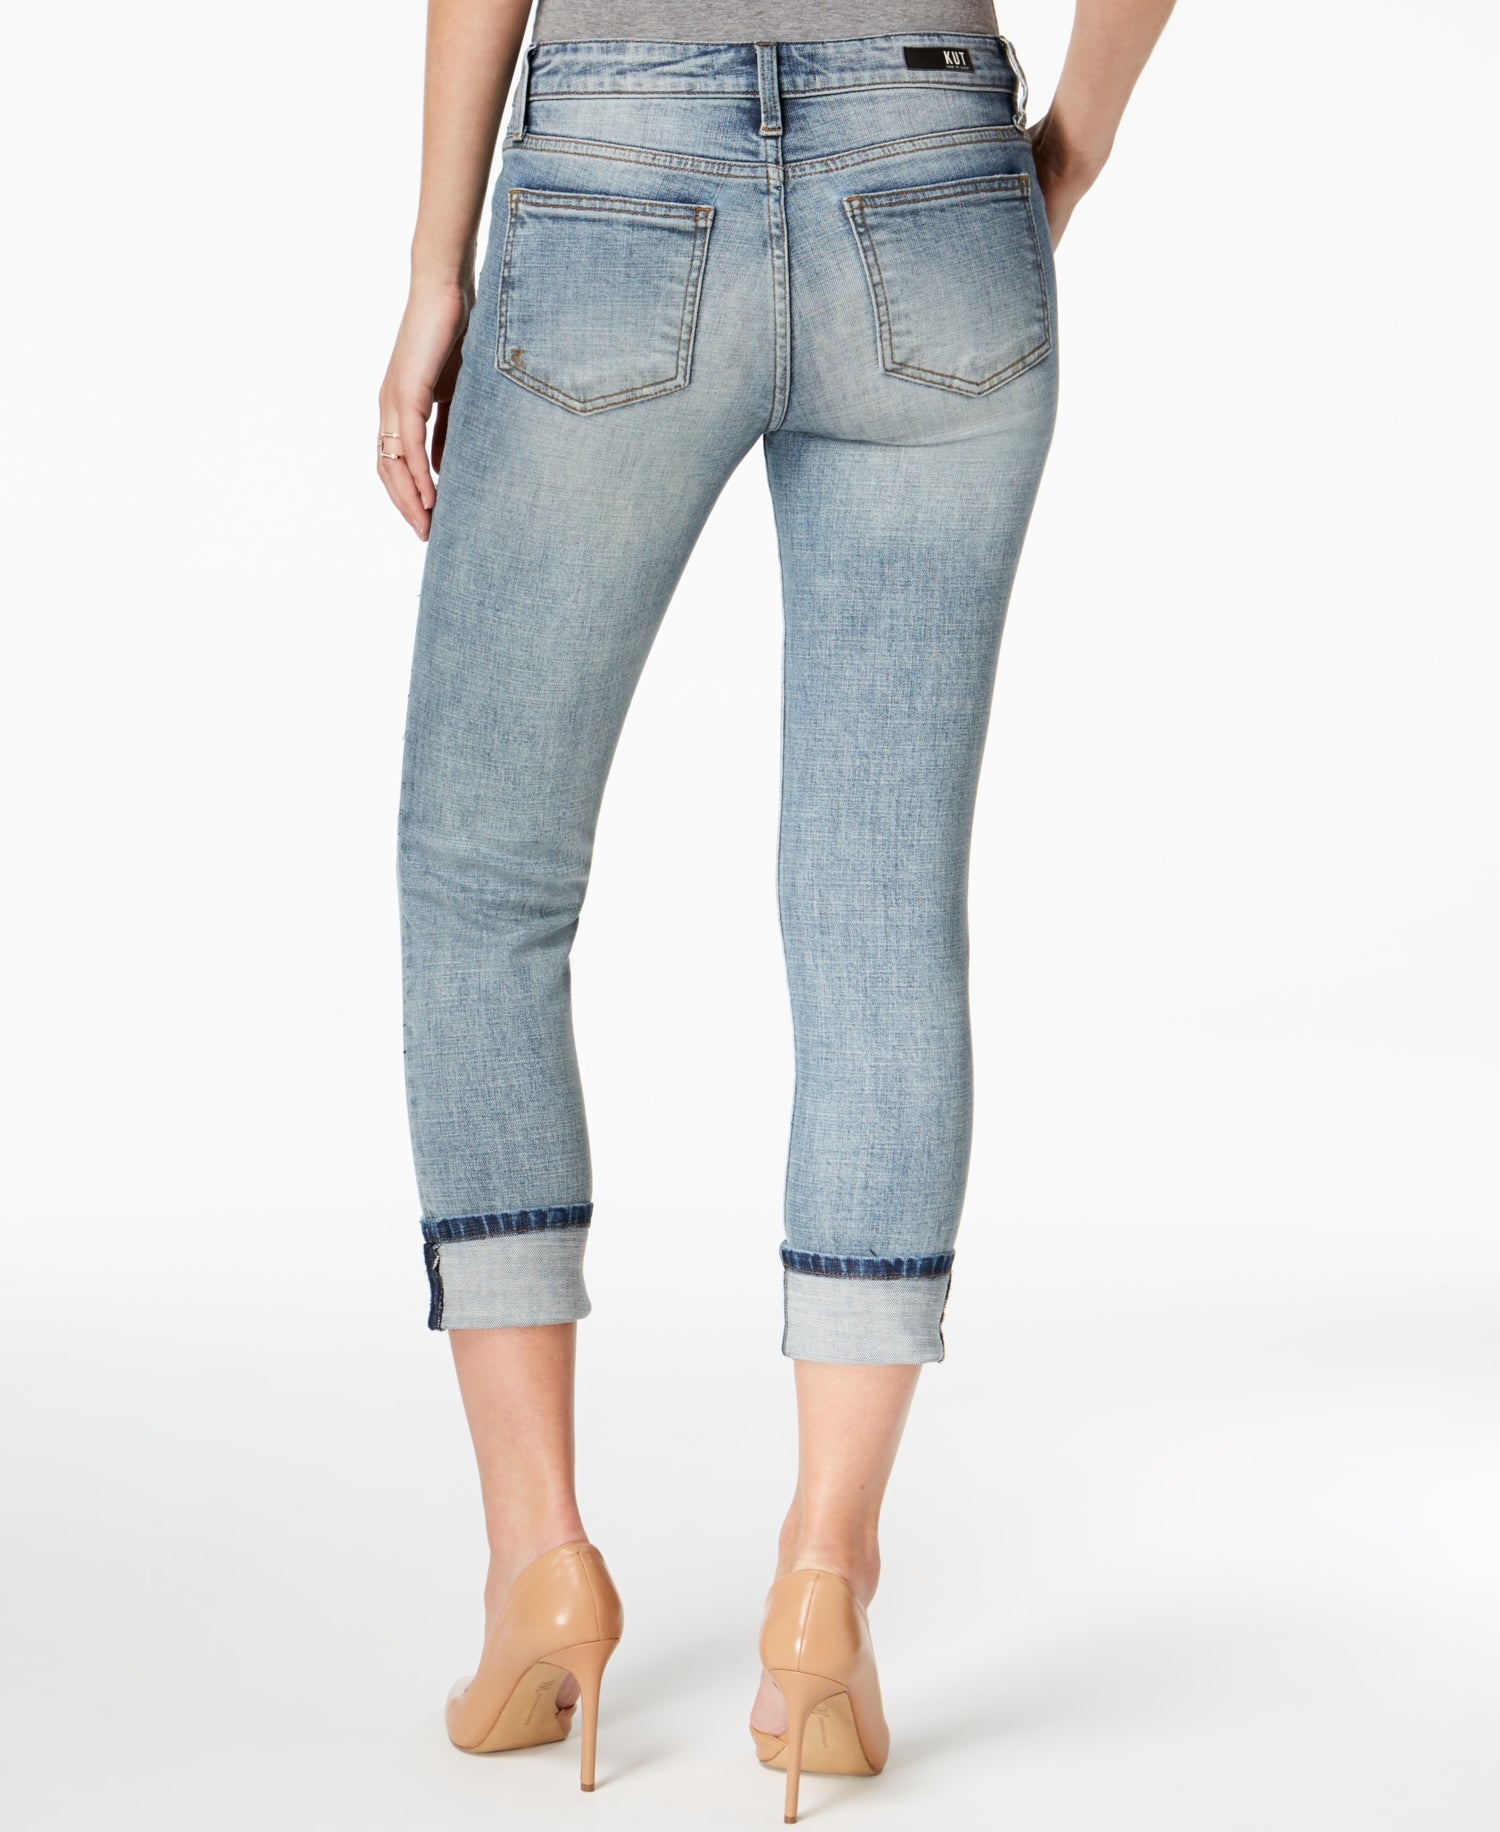 KUT from the Kloth Womens Catherine Ripped Boyfriend Jeans